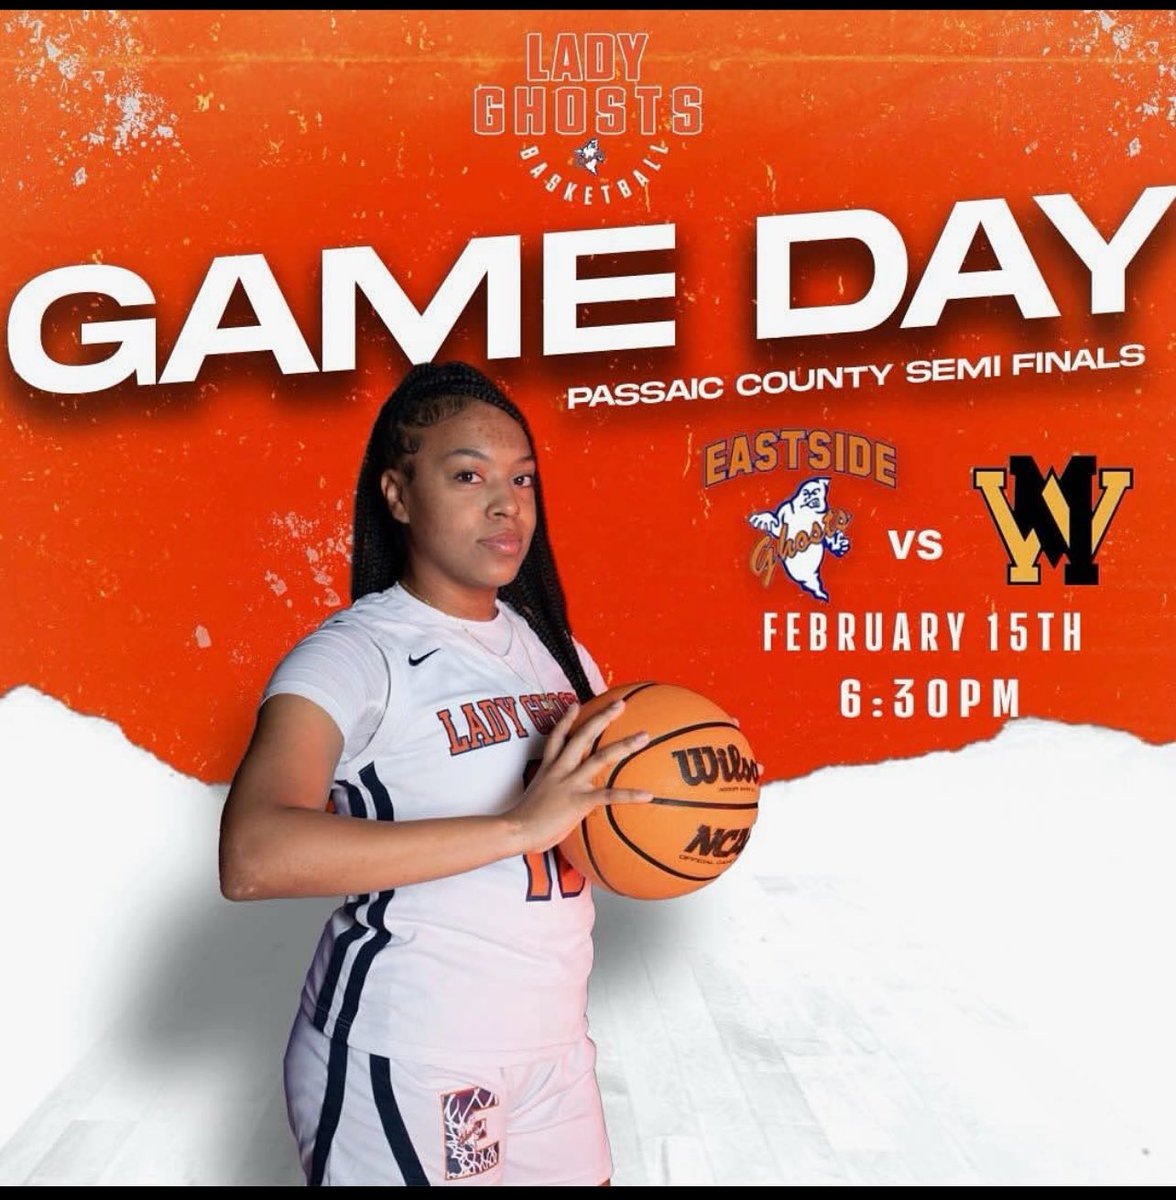 GAMEDAY!!! Passaic County Tournament Semi Finals 📍: Eastside High School ⌚️: 6:30pm 🆚: West Milford #GlissonStrong💜 #JustUs #LLR🕊️